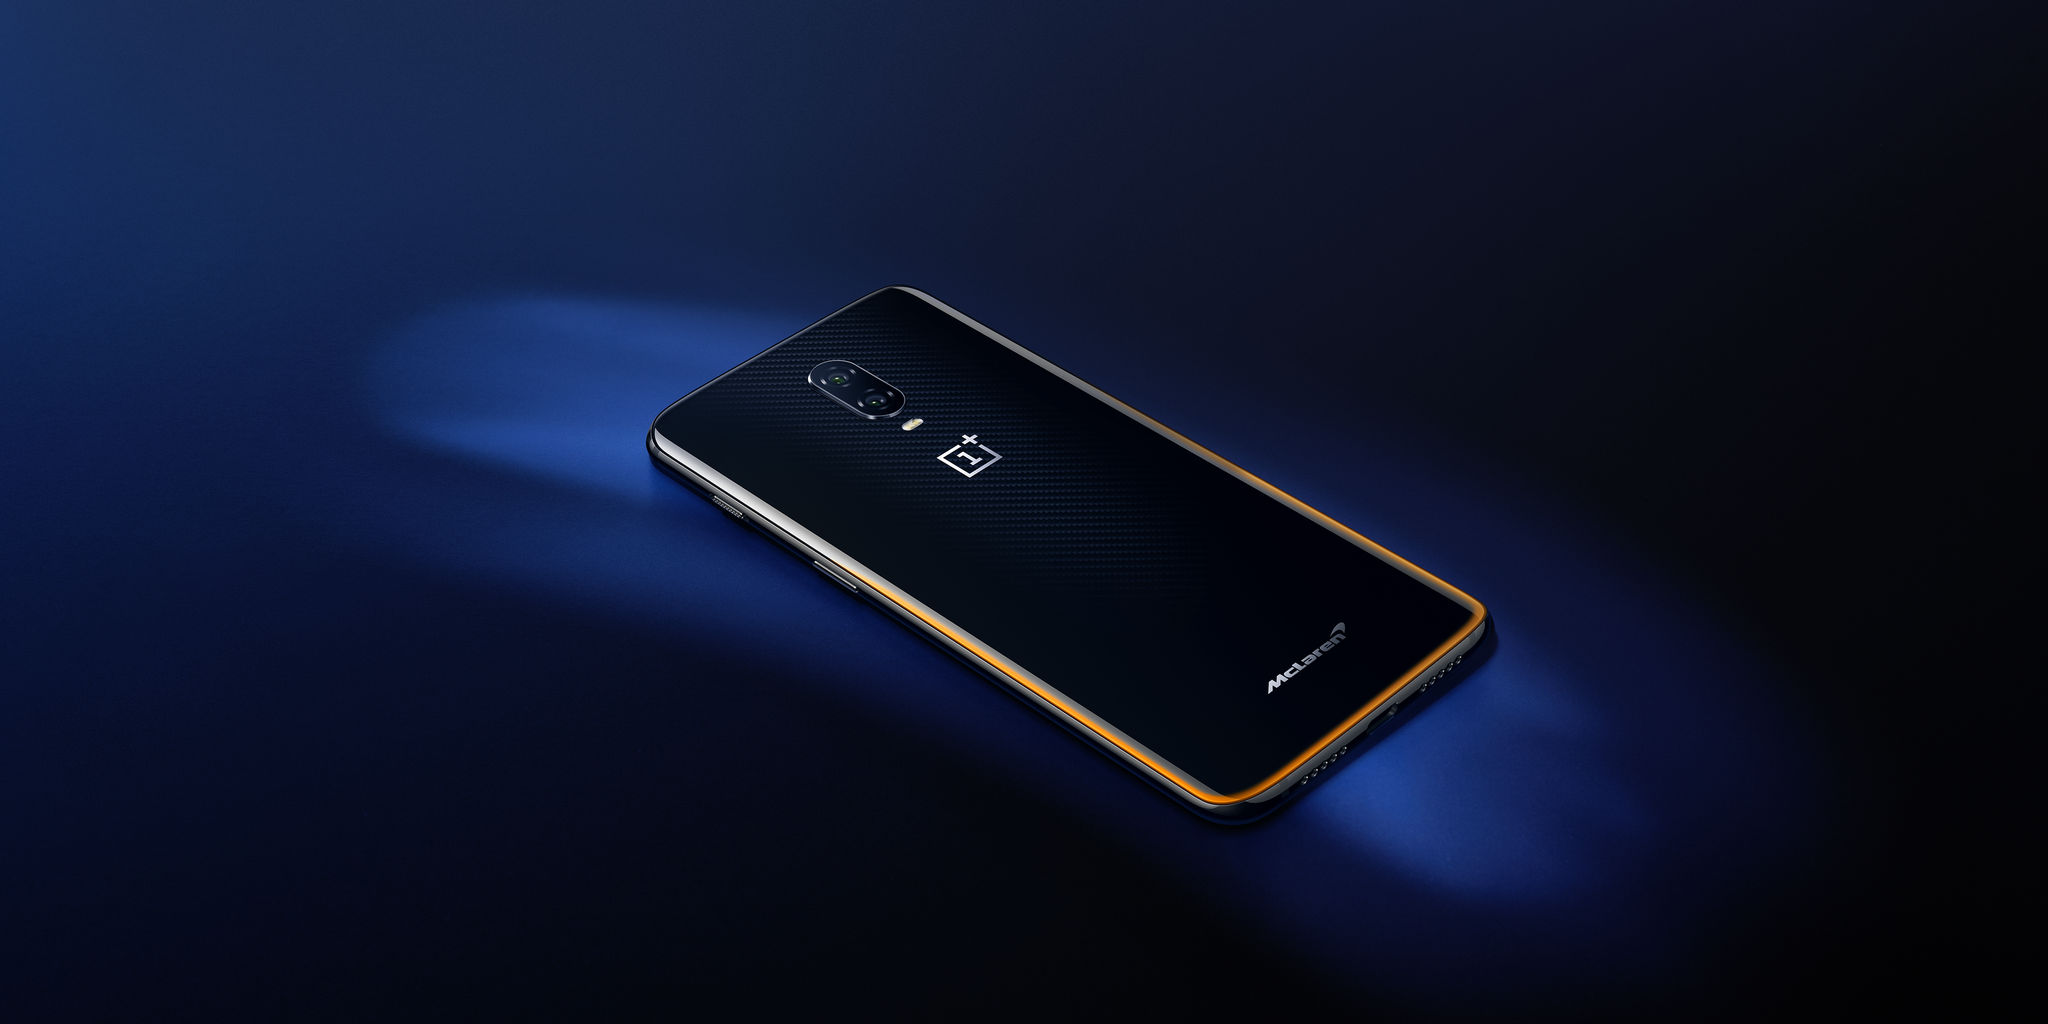 For those who want exclusivity - OnePlus 6t Mclaren Edition